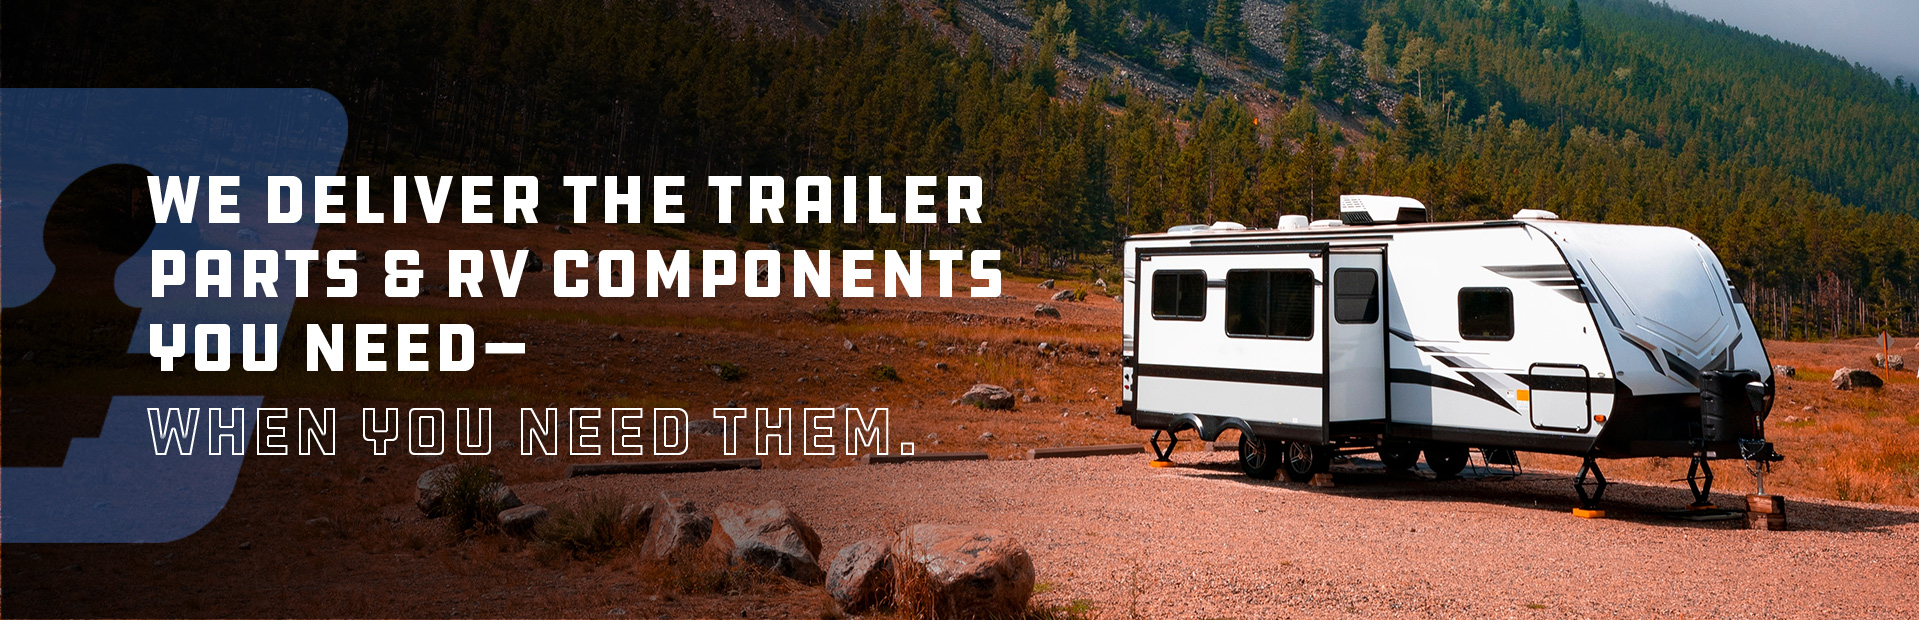 White RV parked on a gravel road by a forest with mountains in the background, overlay text promoting RV parts delivery